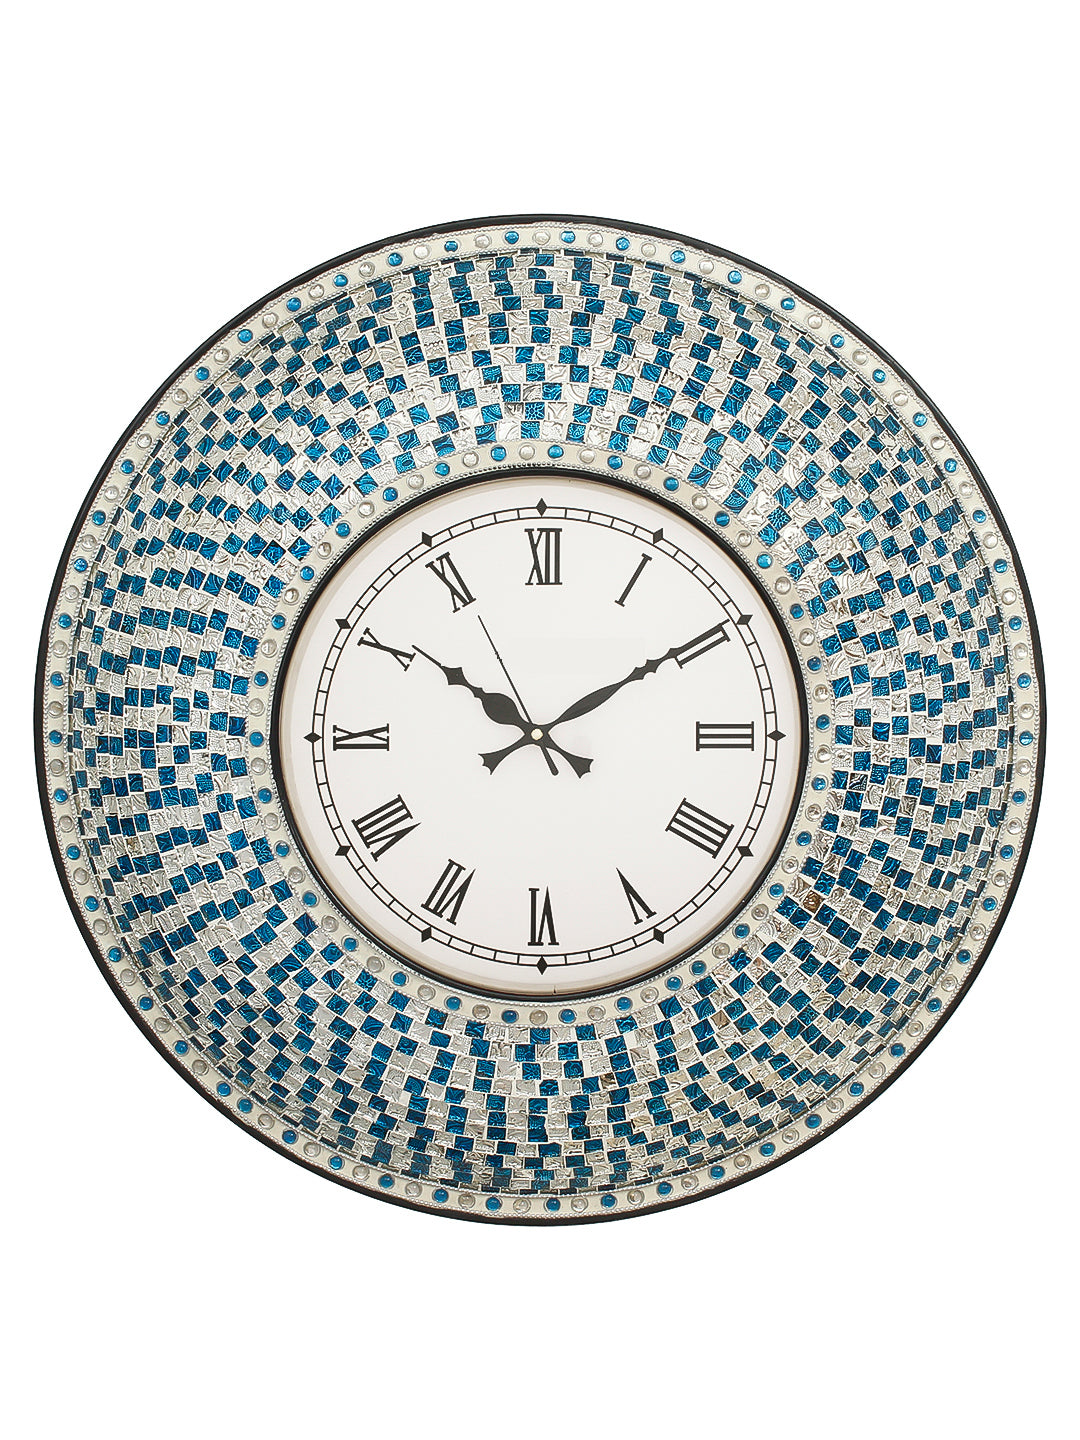 Blue Mosaic Glass & Wood Round Handcrafted Analog Ethnic Luxury Roman Numeral Wall Clock